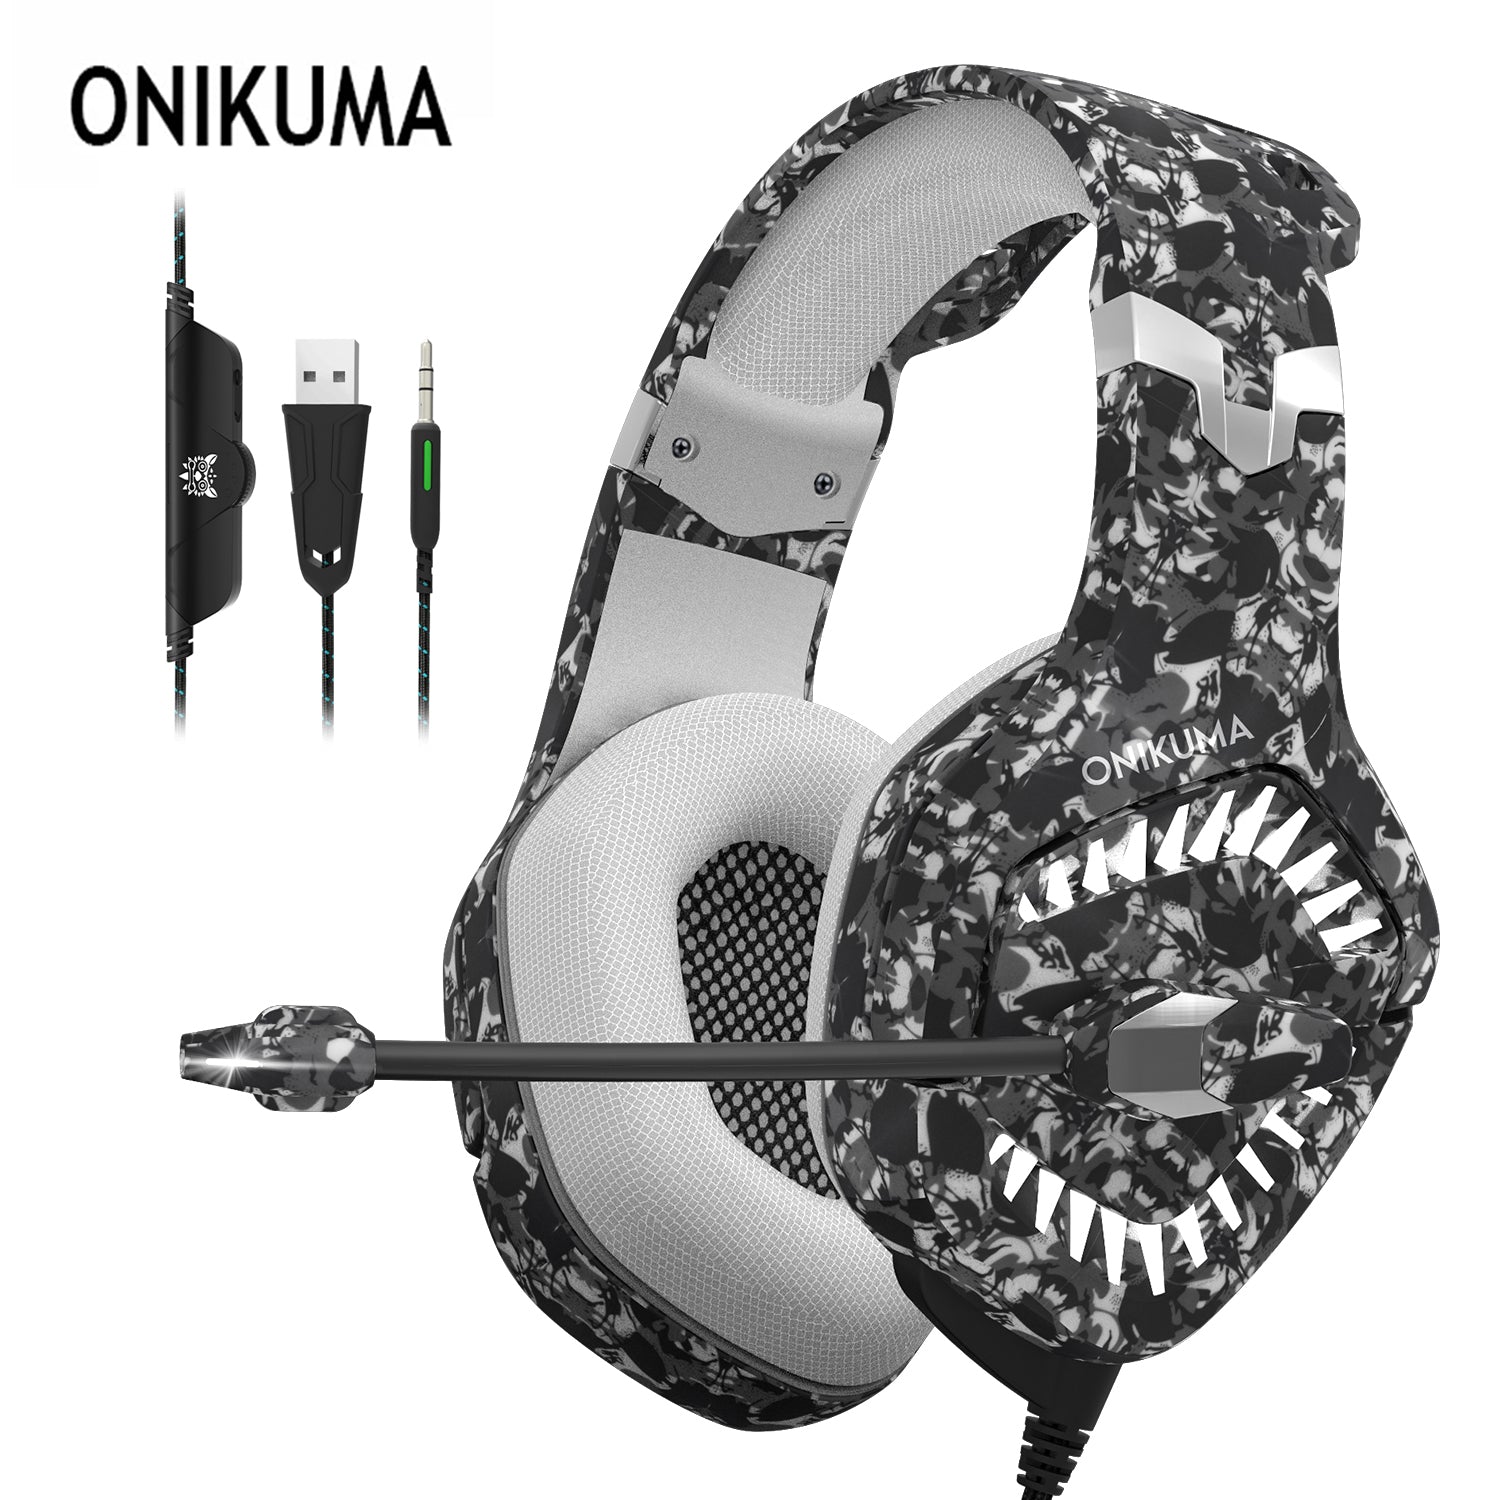 Gaming Headset, ONIKUMA K1B Pro Camo Elite Stereo Gaming Headset, Noise-canceling with Mic LED Lights Earphone for PS4, Xbox, PC and Switch, Grey